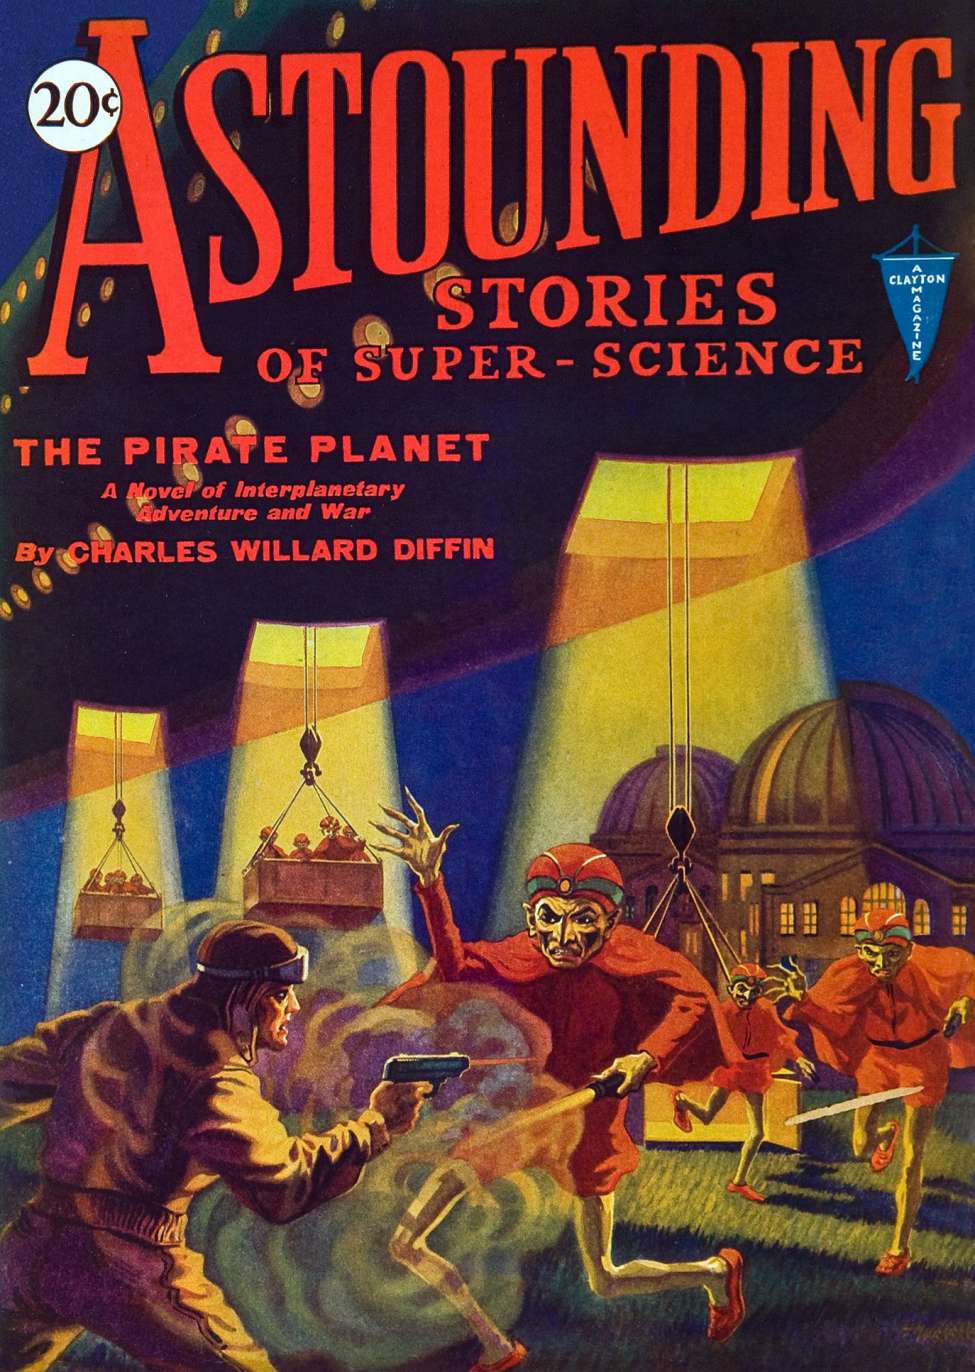 Comic Book Cover For Astounding Serial - The Pirate Planet - C W Diffin